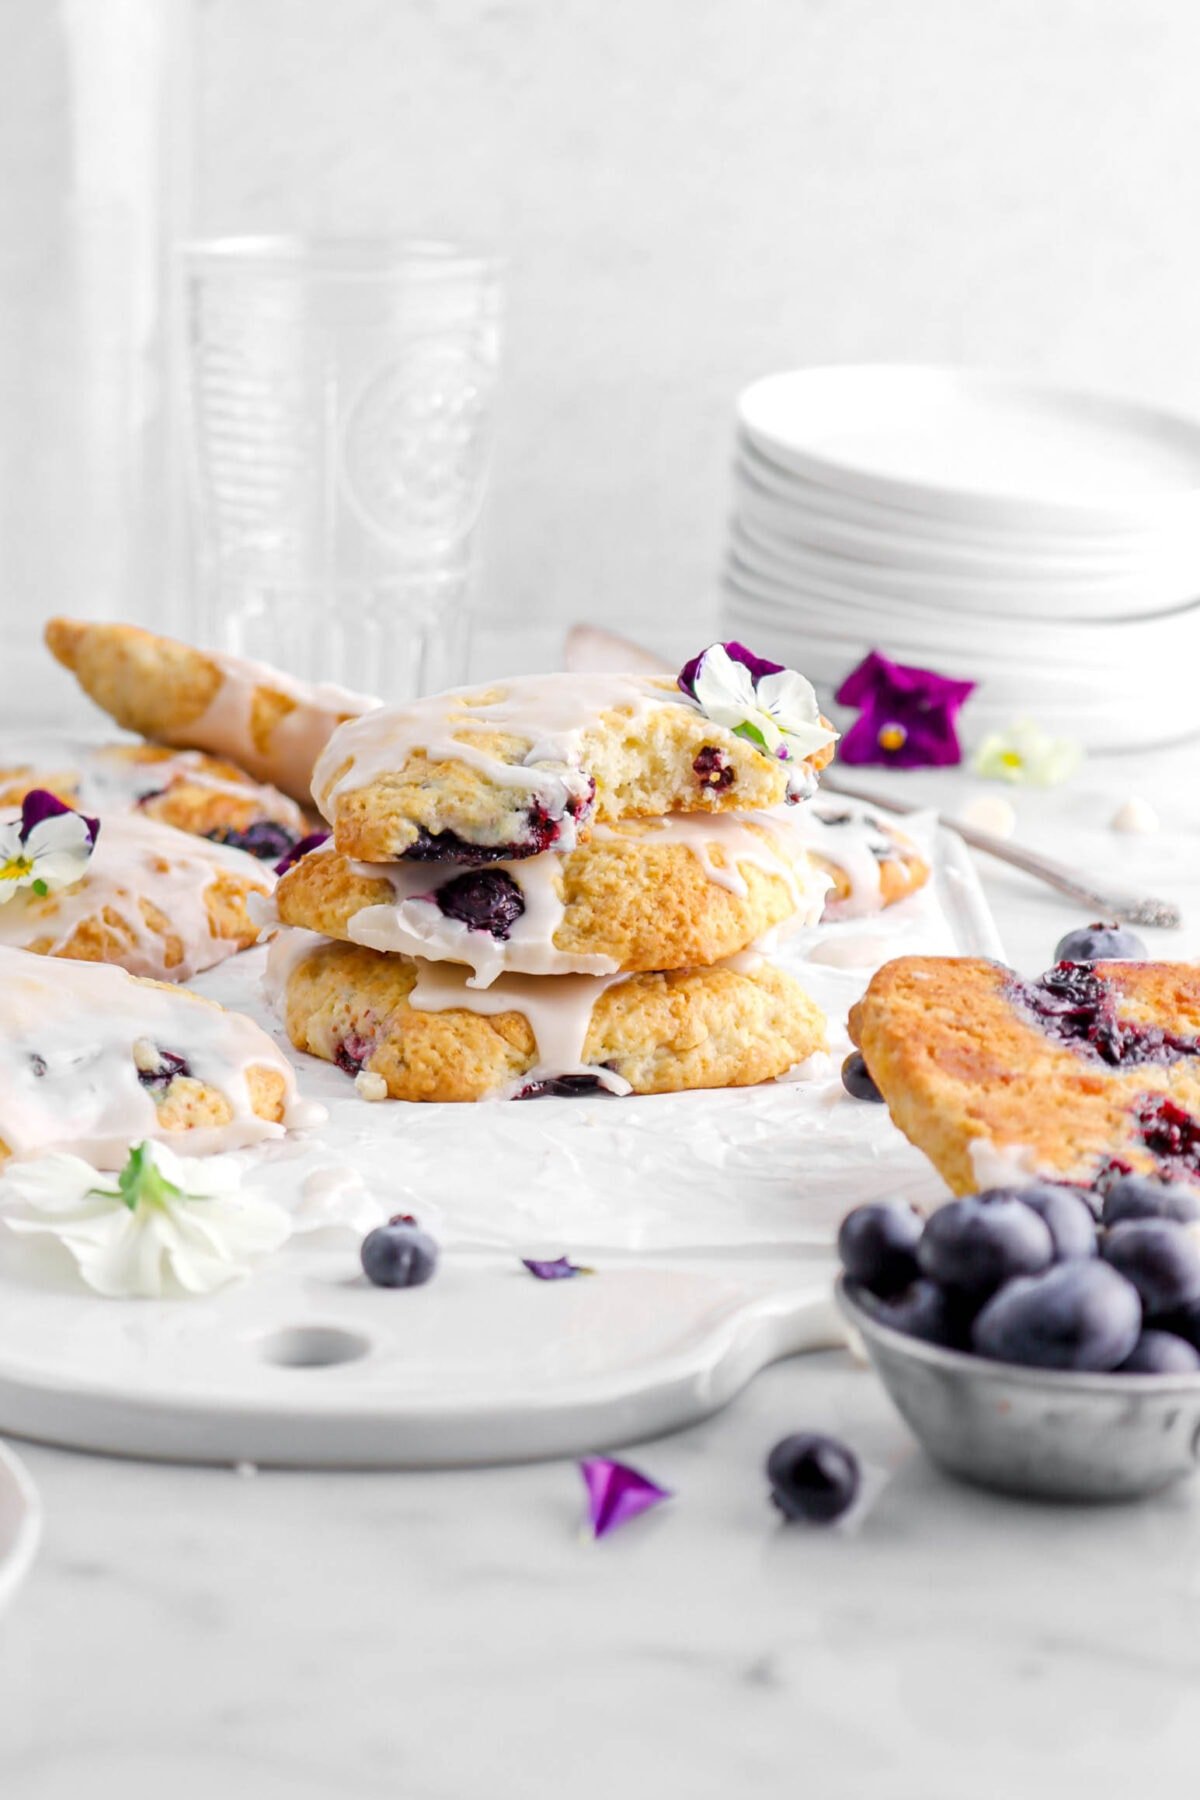 front shot of stacked scones with top scone missing a bite and a flower on top, with more scones around on white tray, with purple and white flowers, and blueberries scattered around on marble surface with stack of plates and empty glasses behind.